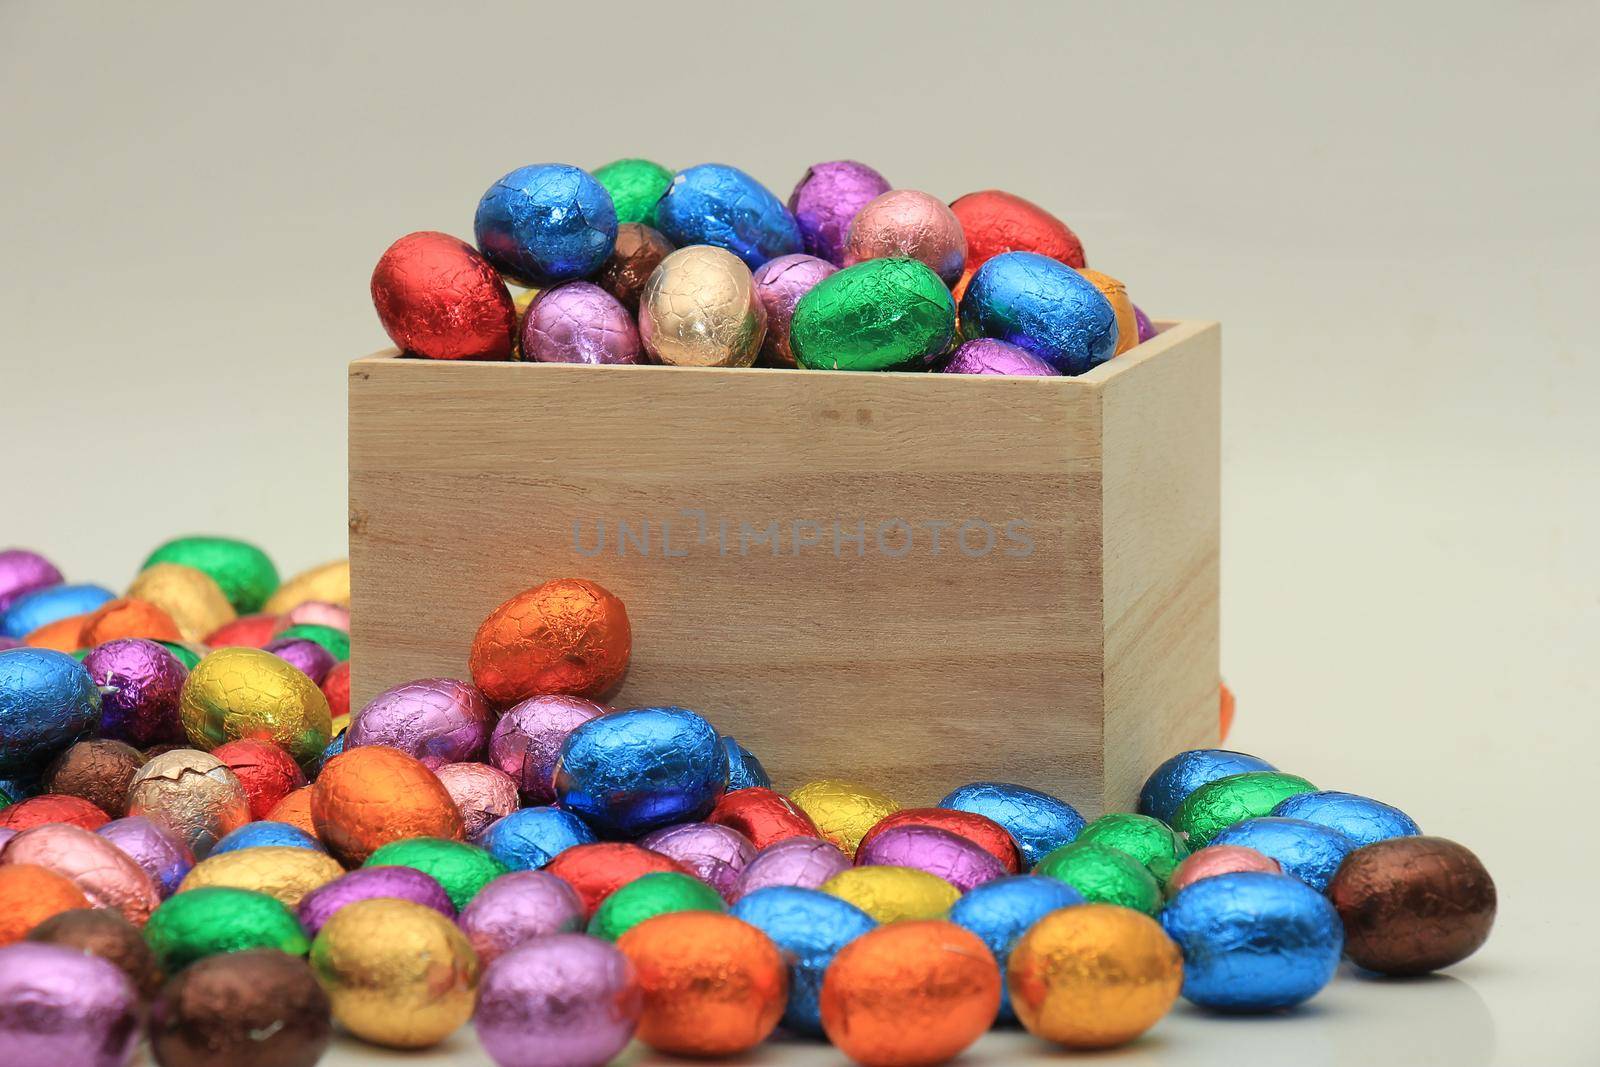 Foil wrapped chocolate easter eggs in a wooden box by studioportosabbia